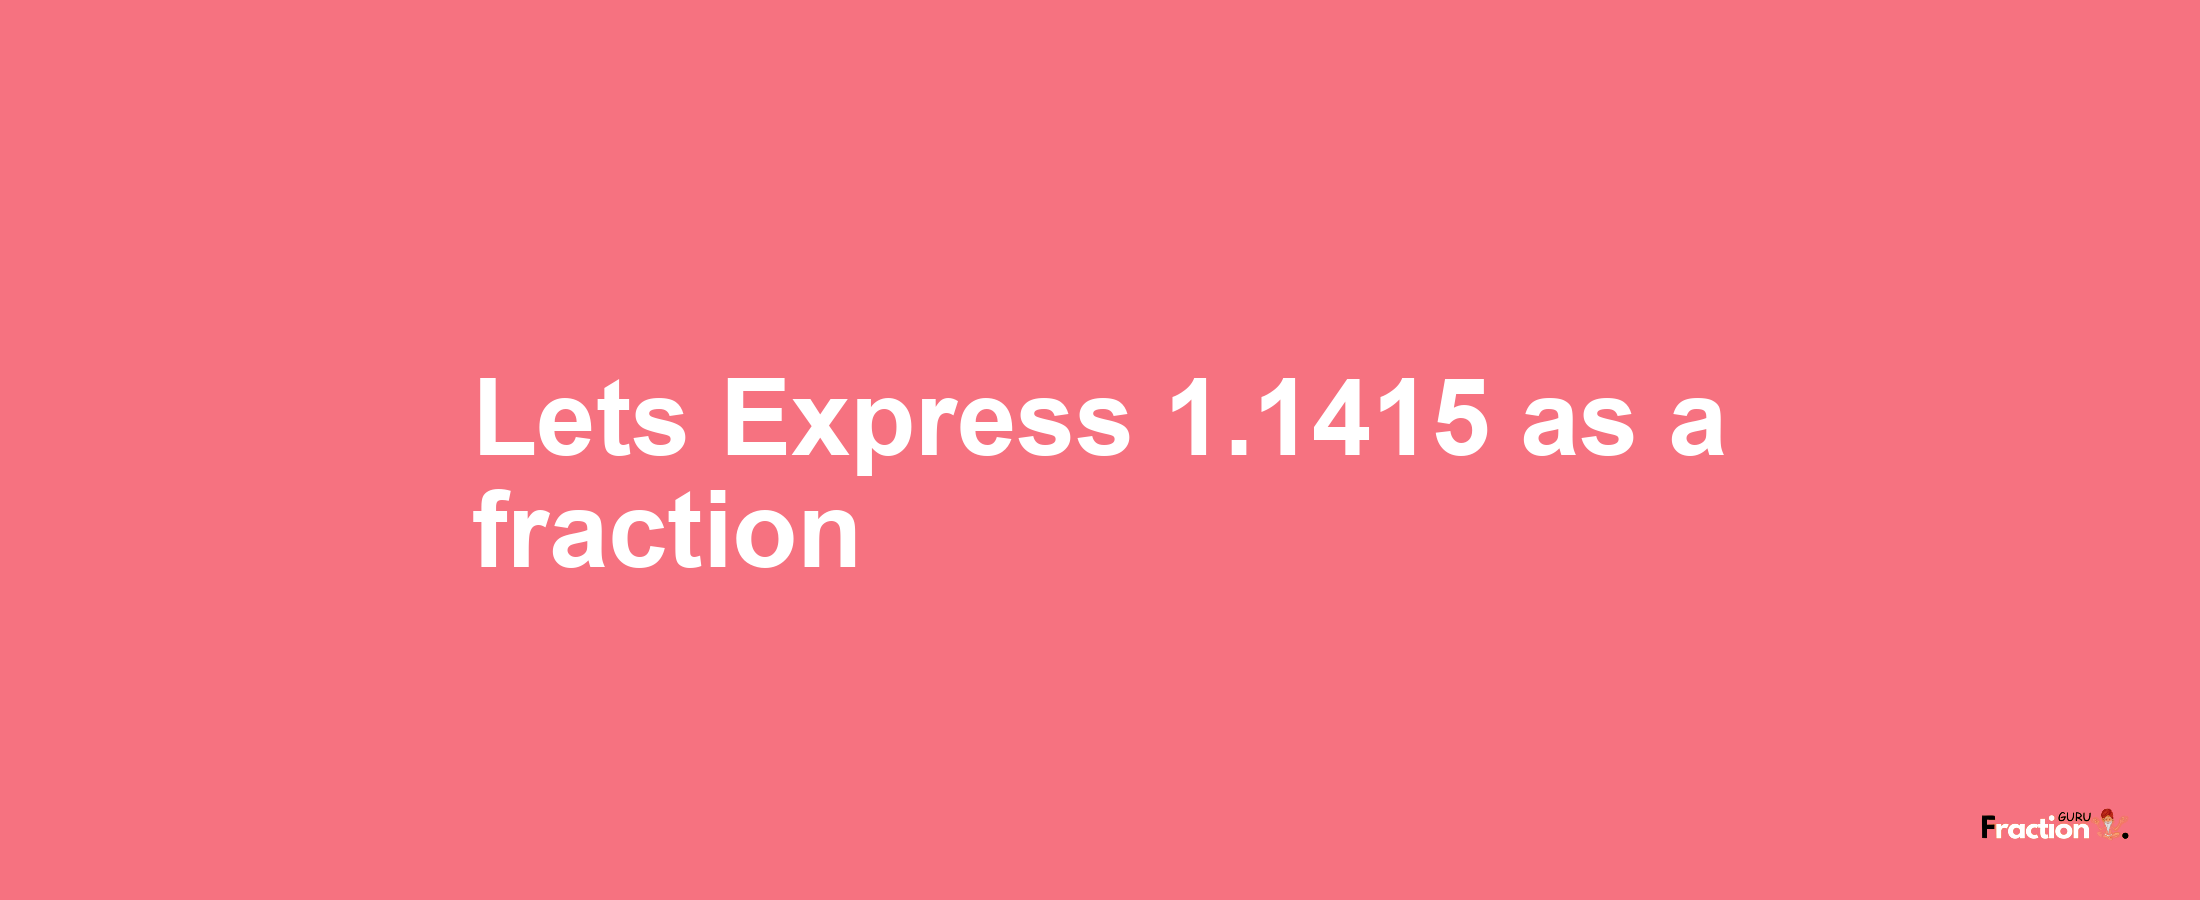 Lets Express 1.1415 as afraction